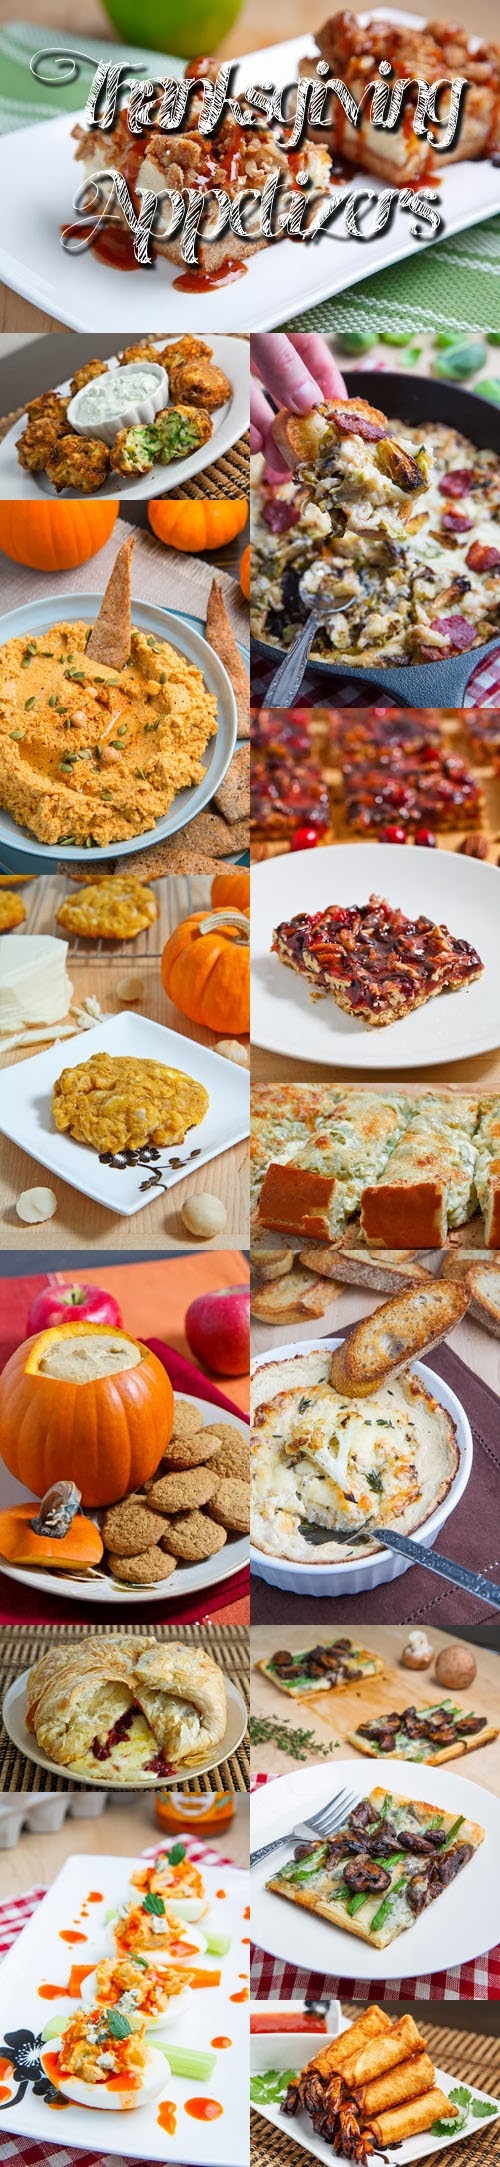 Thanksgiving Day Appetizers
 Thanksgiving Appetizer Recipes on Closet Cooking